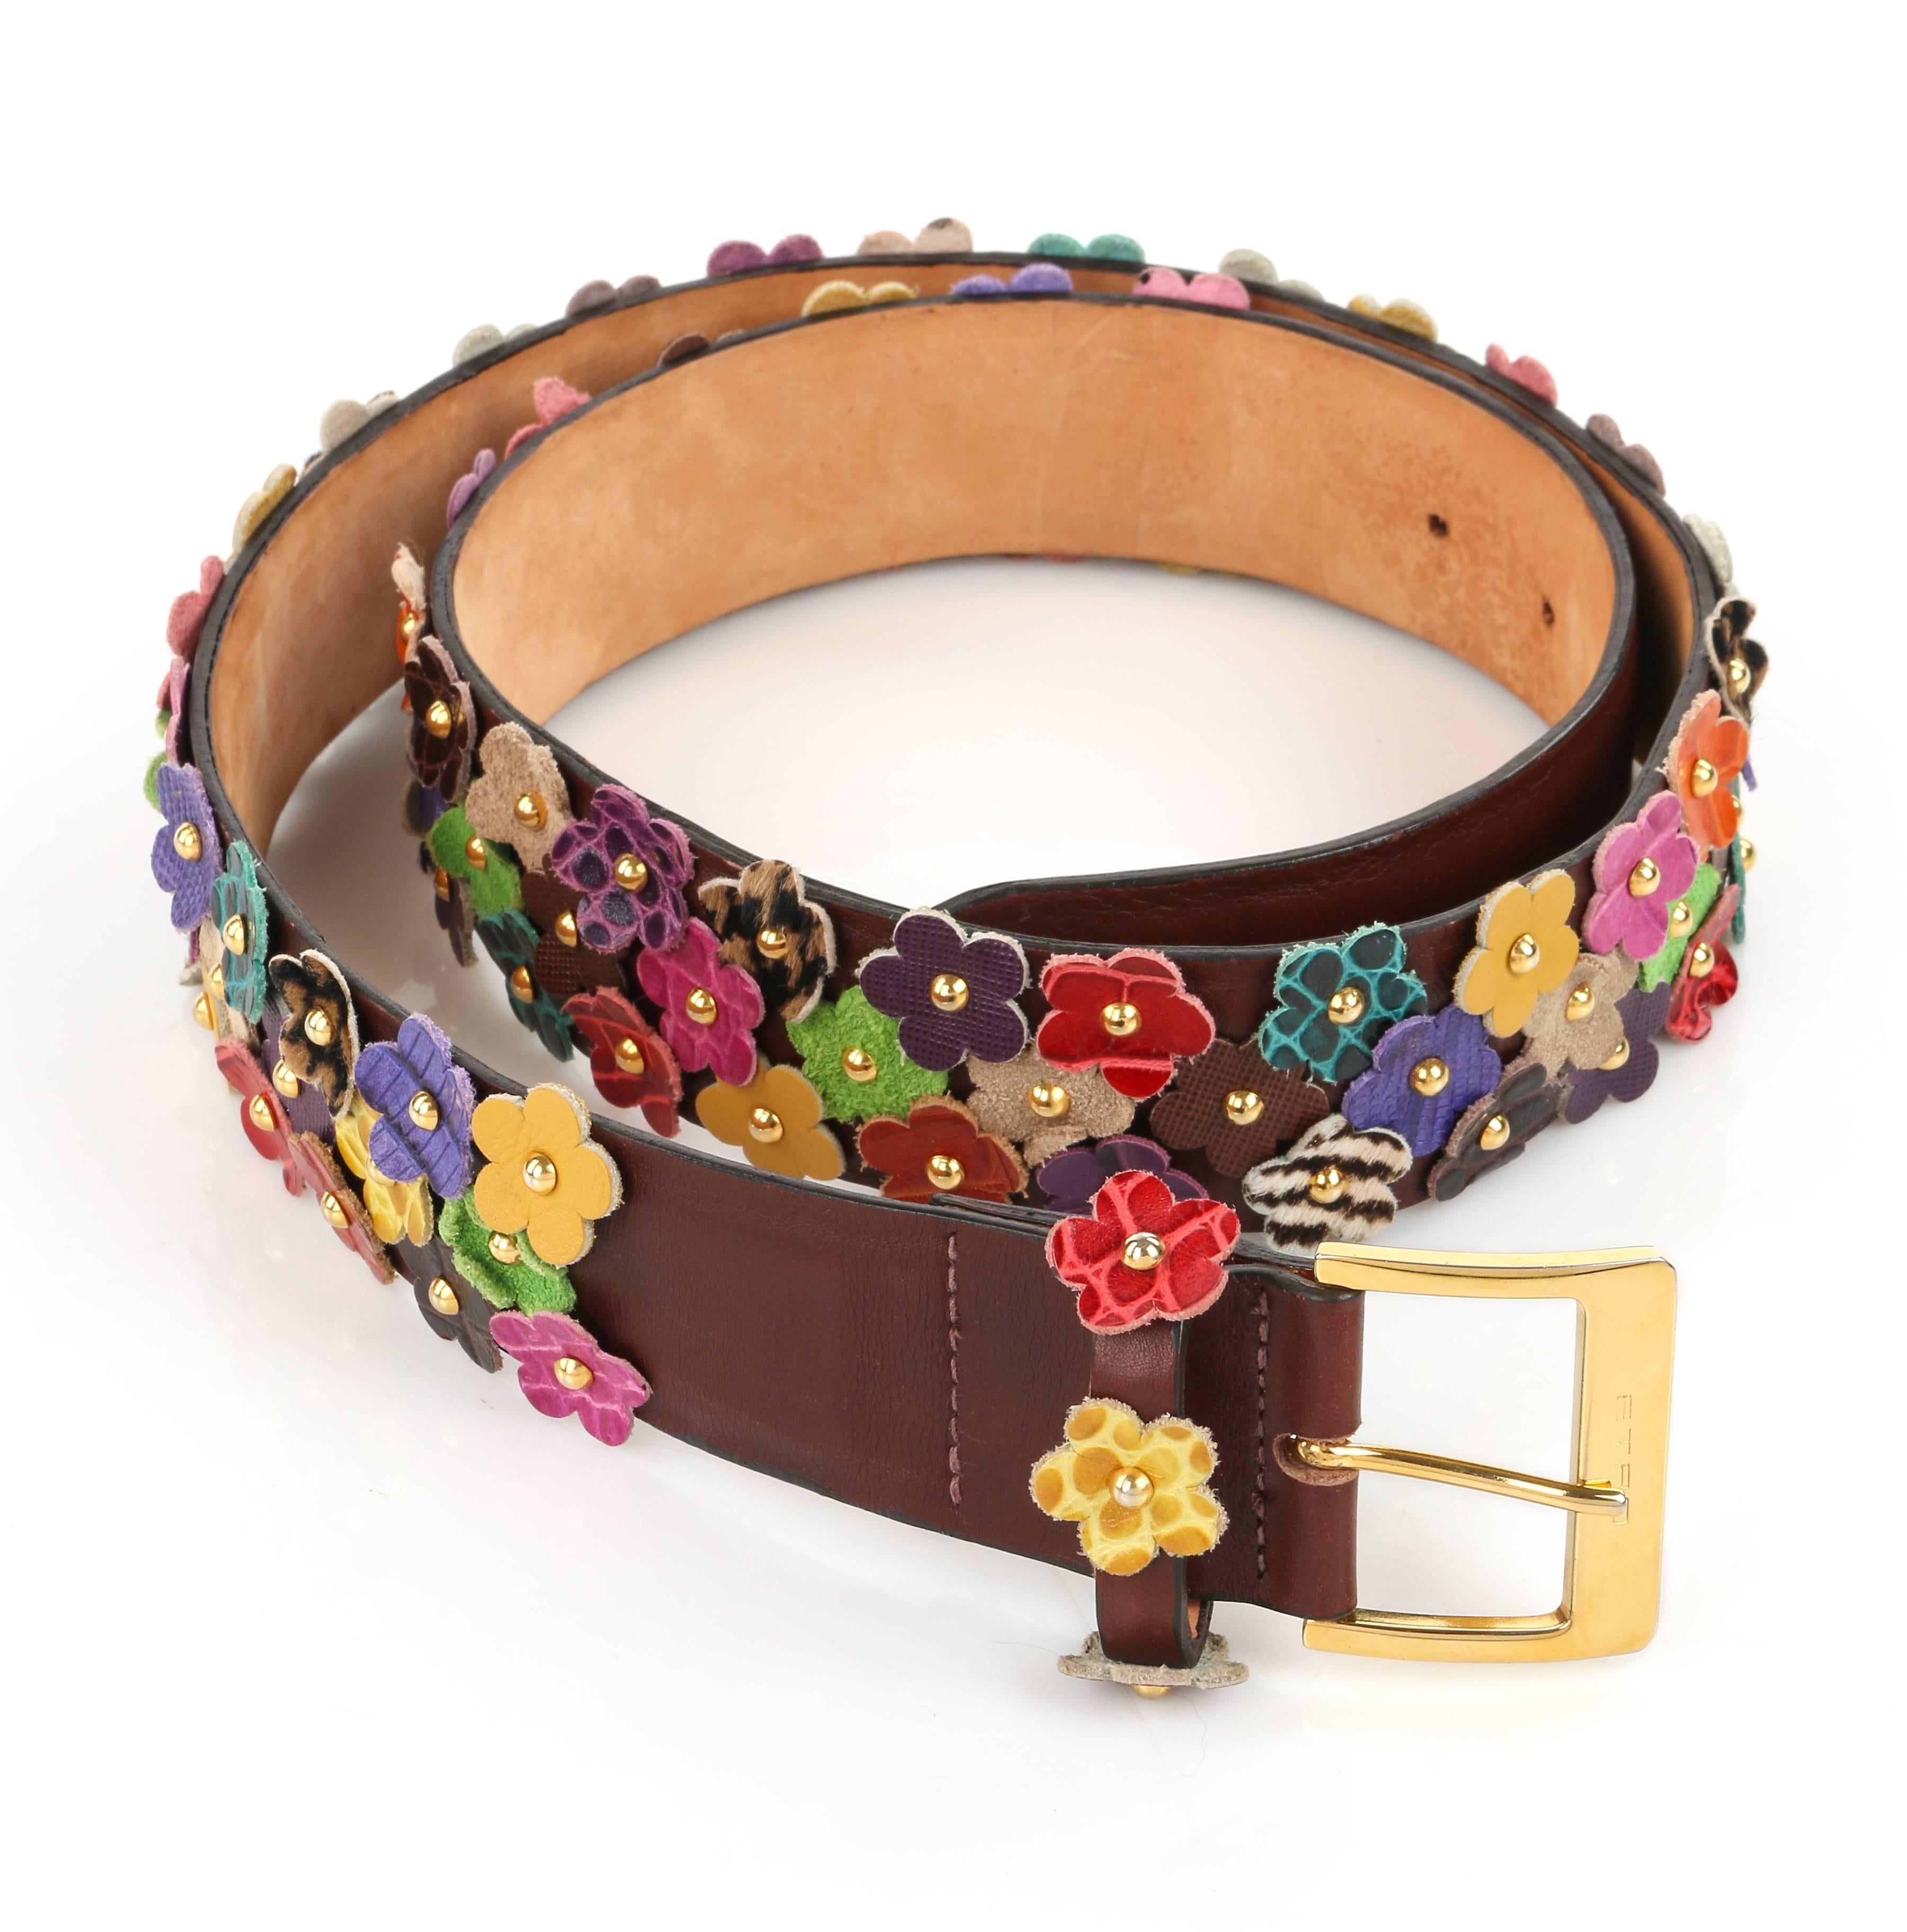 Etro Milano floral studded leather belt. All over leather cut flowers in multiple colors and prints (alligator, lizard suede, saffiano, etc.). Flowers are set into leather belt with gold-toned dome studs. Brown leather belt base. Gold-toned buckle